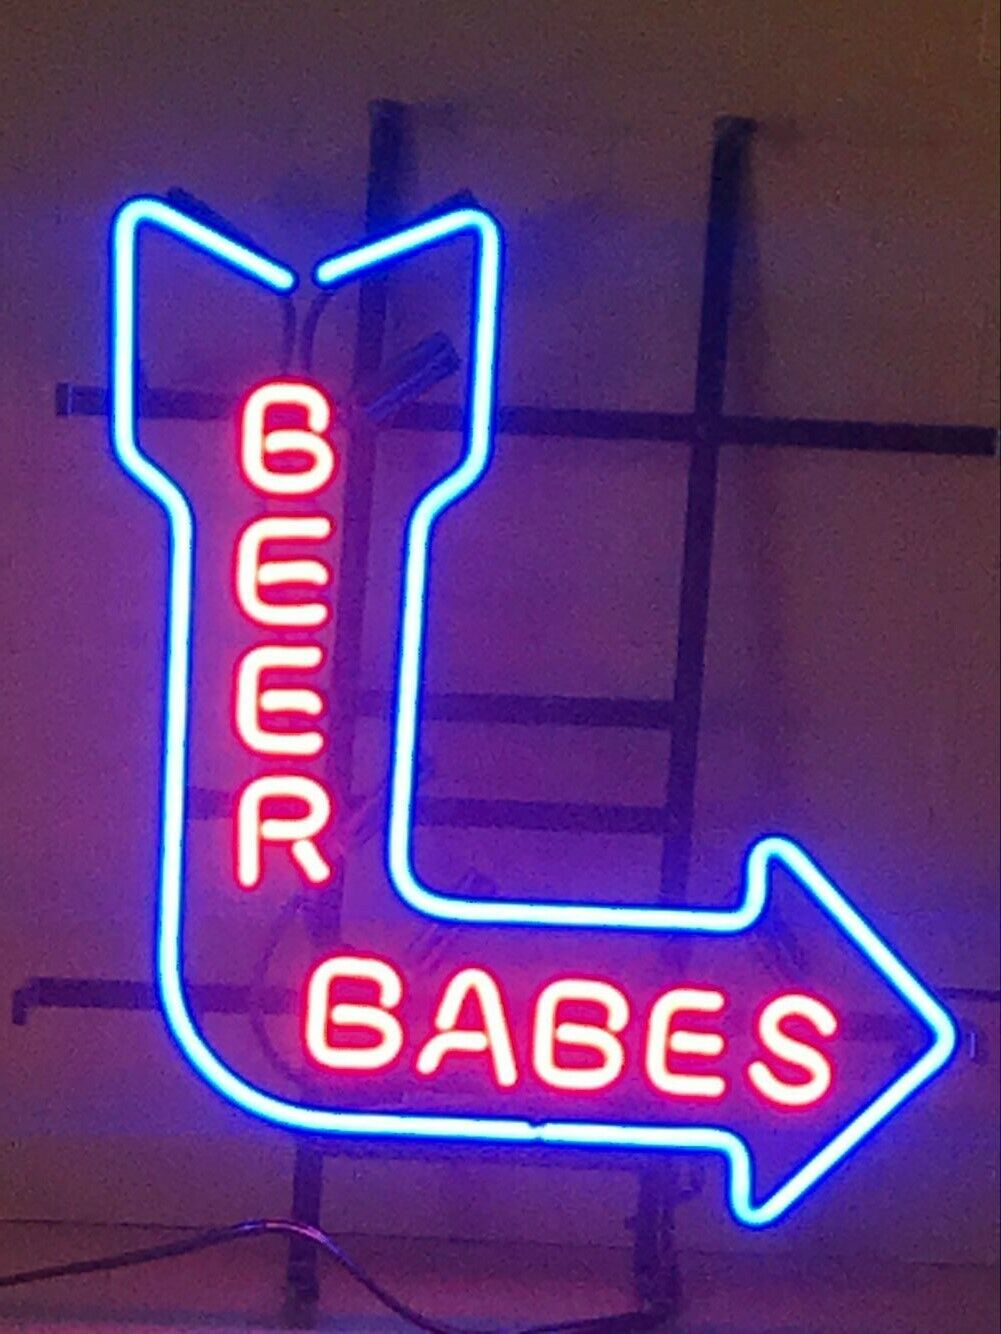 Beer Babes Arrow Neon Sign Lamp Light Beer Bar With Dimmer